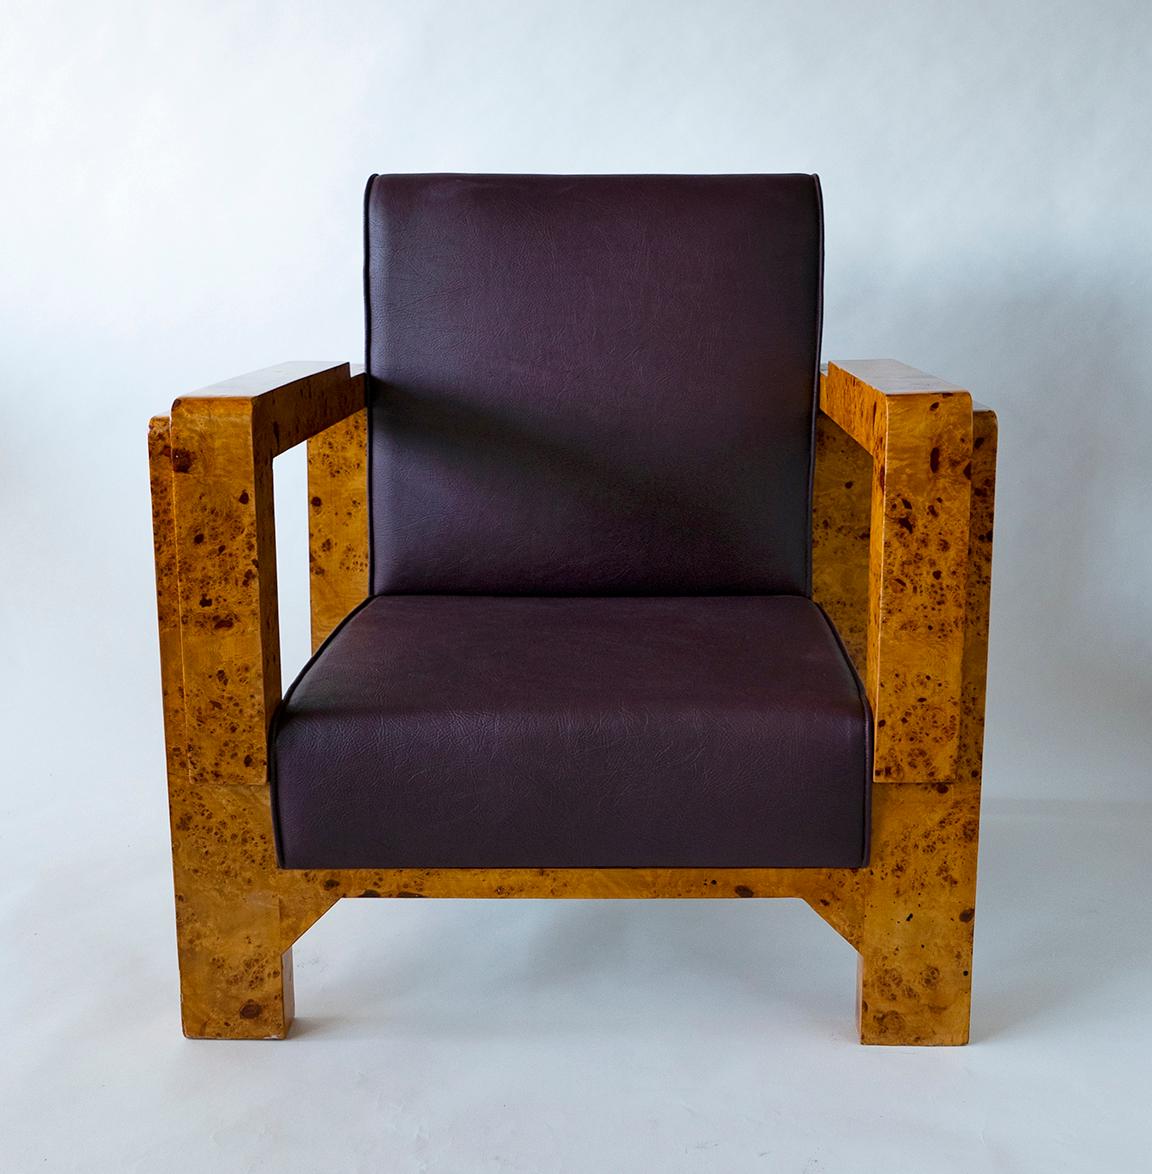 Burled and figured walnut and rootwood frames and new burgandy leather upholstery- by Hungarian master architect and furniture designer Lajos Kozma.